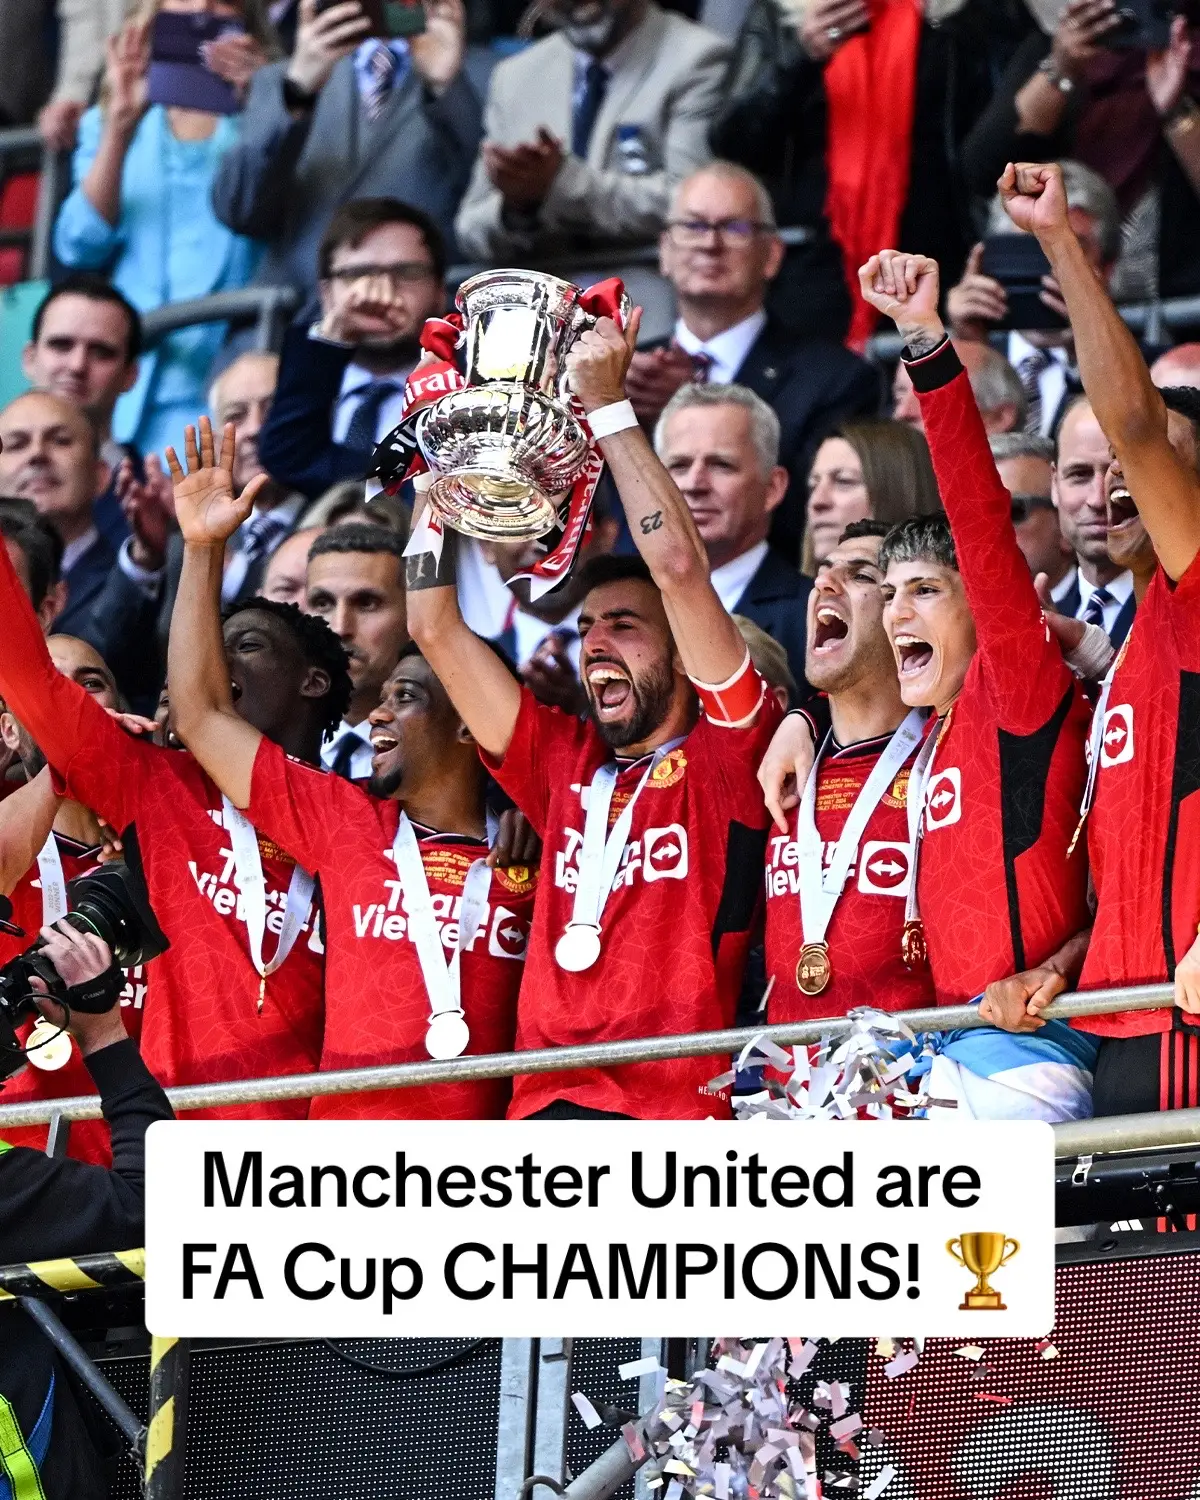 Man United end Man City’s dreams for a double as they beat them in the FA Cup final🏆 #football #manchester #manchetserunited #united #ggmu #manunited #manutd #manchestercity #mancity #facup #fa #Soccer #futebol #futbol 